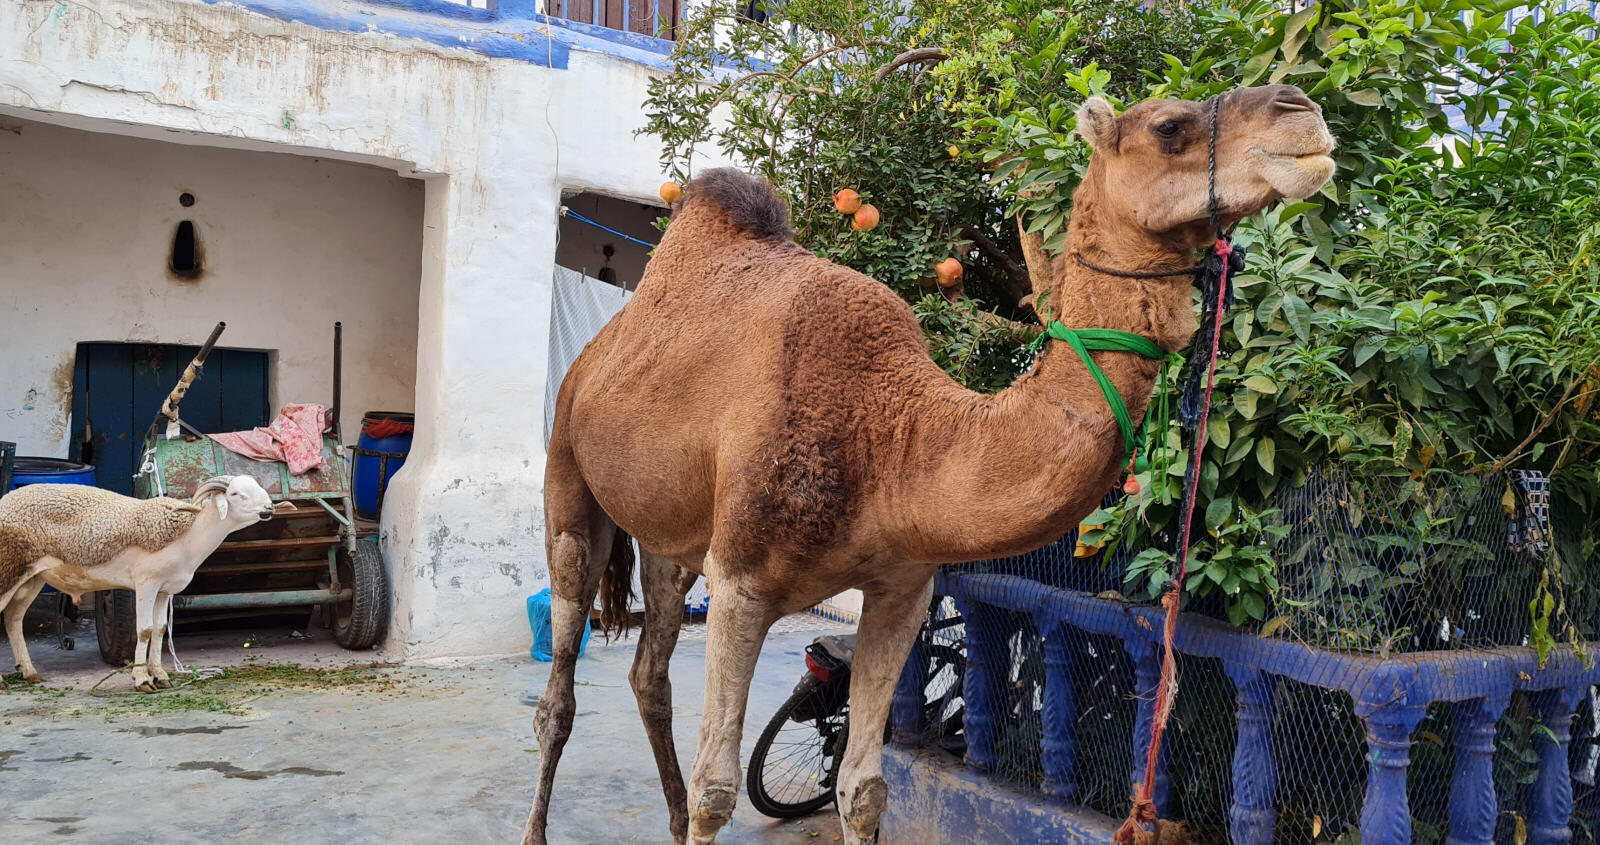 A camel and a sheep in a courtyard in Marrakech